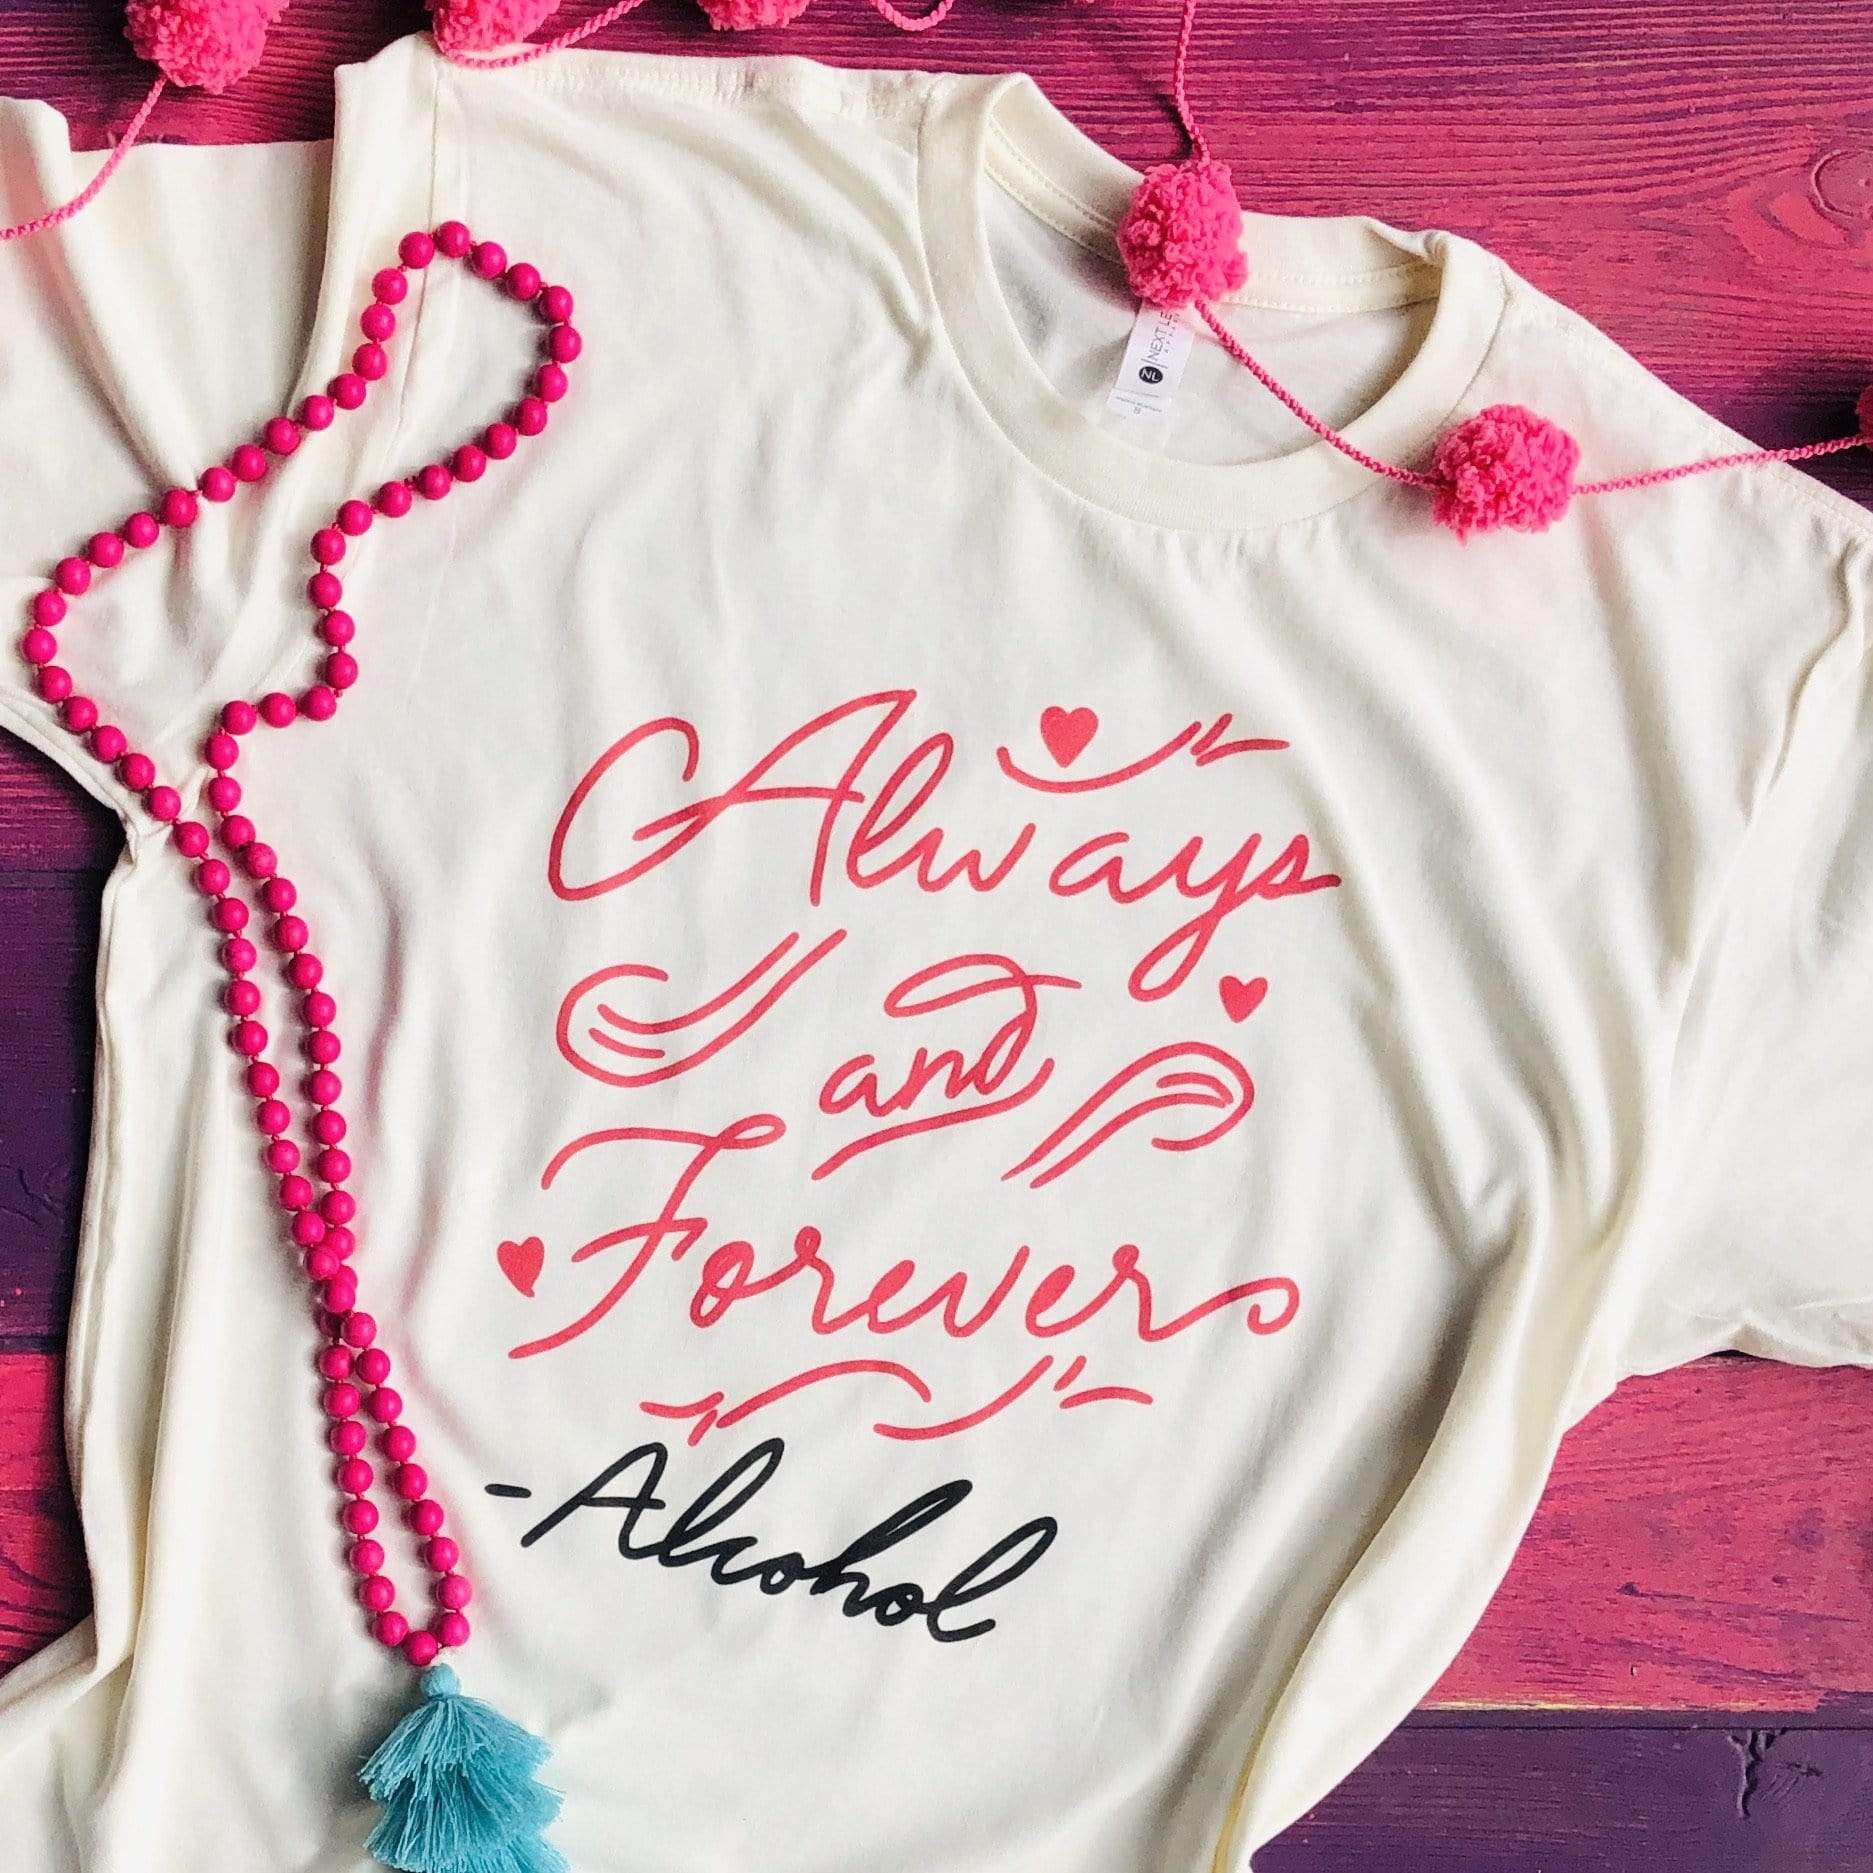 An ivory tee shirt laid on a purple wooden background, pictured with pink beads and pink puff balls. This tee shirt has a cursive graphic that says "Always and Forever" - Alcohol.